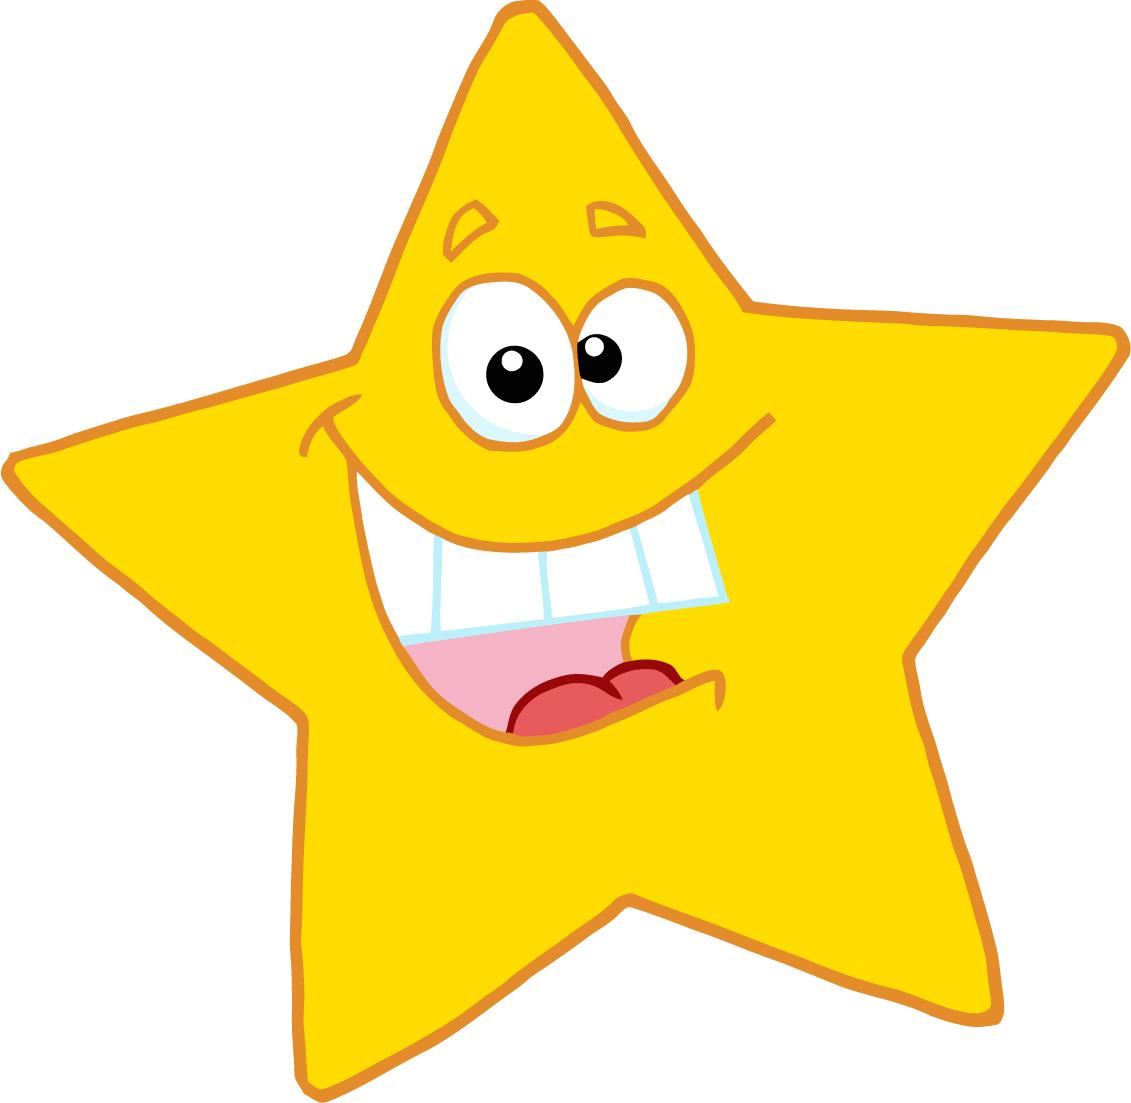 Pictures Of Animated Stars - ClipArt Best